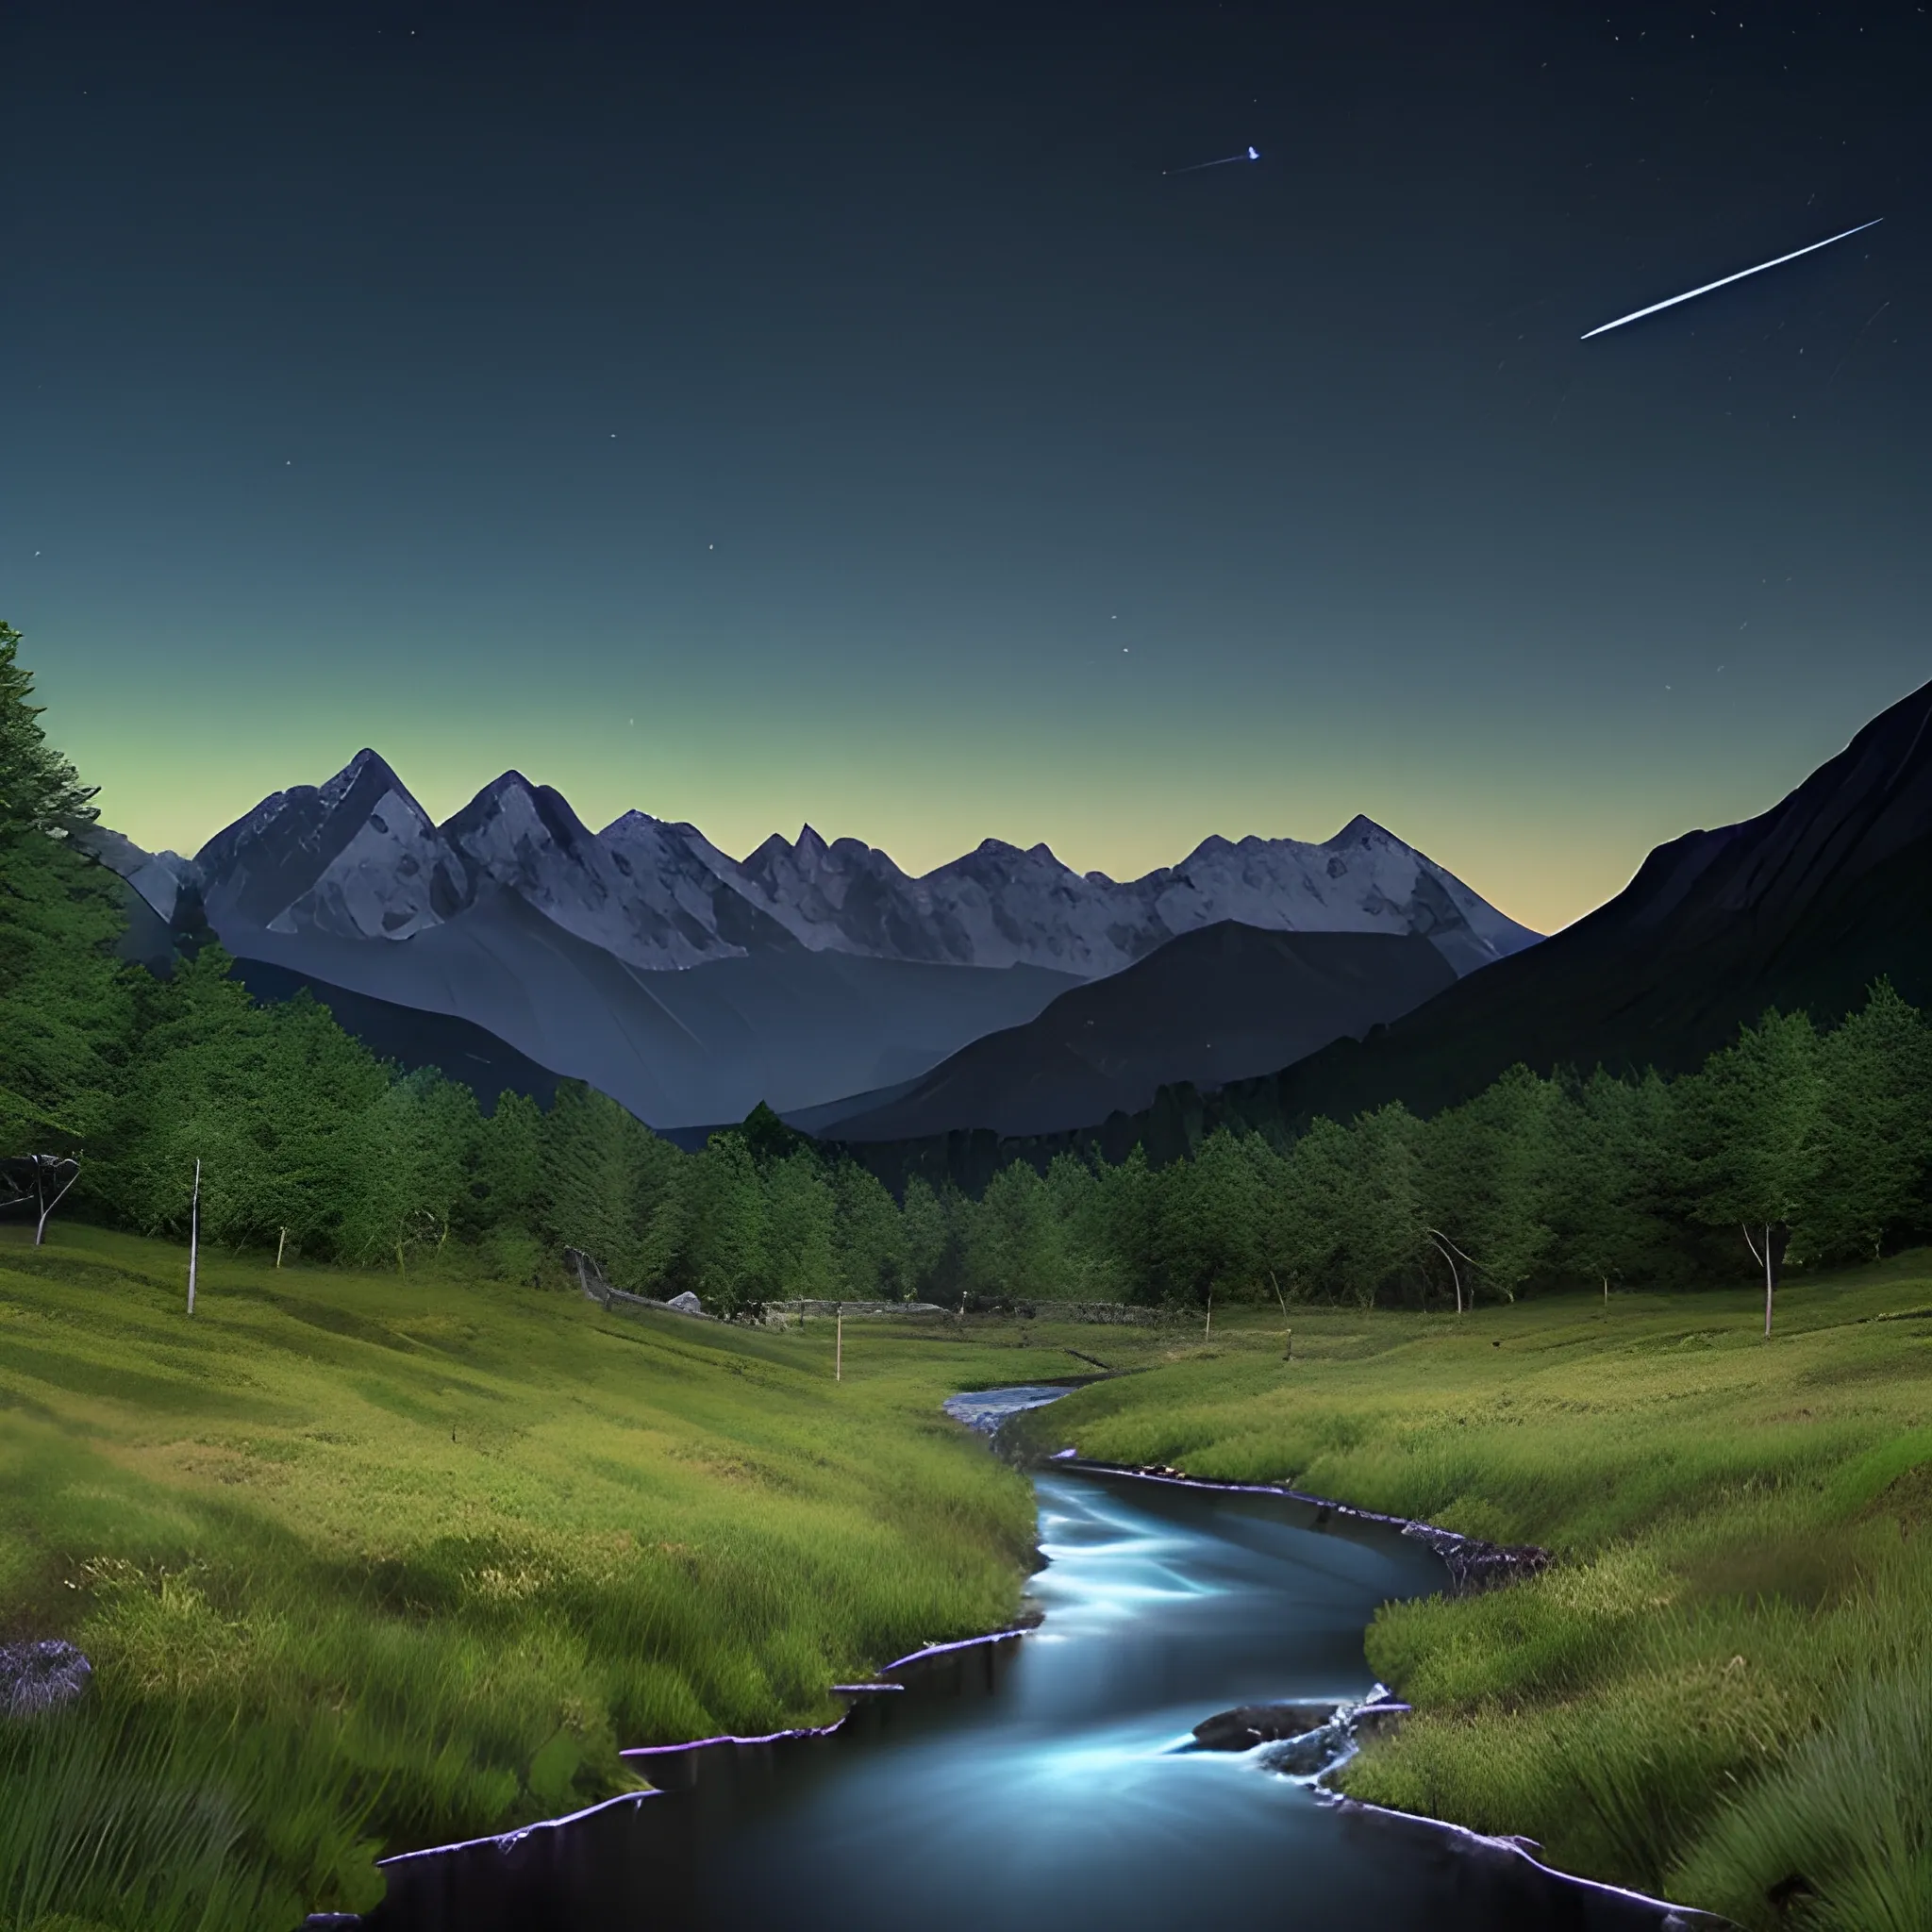 "Generate: Draw a realistic landscape image with a night sky. In the distance, there are mountains, a stream flowing down the mountains, and a green grassland. The image should be in ultra-high-definition 4K resolution."




